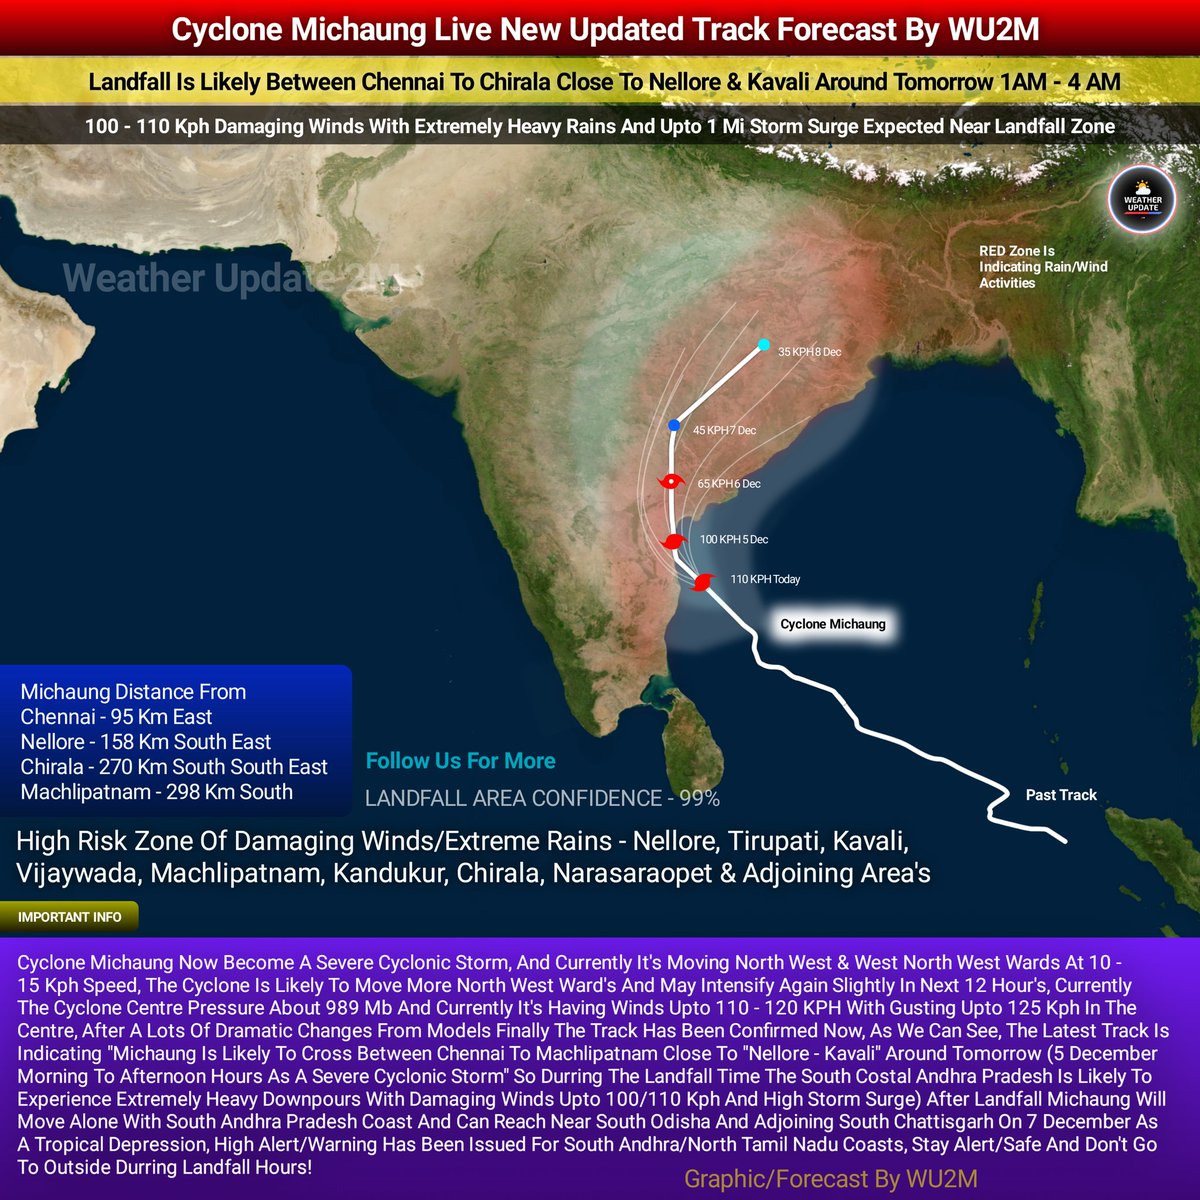 #CycloneMichaung Live Update And Latest Final Track! #Cyclone is Moving North West Ward's Likely To Cross The South Andhra Pradesh Coast Around Tomorrow Morning - Afternoon Hours As A SCS, Extremely Flooding Rains With Damaging Winds Will Continue Till 6 Dec #ChennaiRains #wu2m